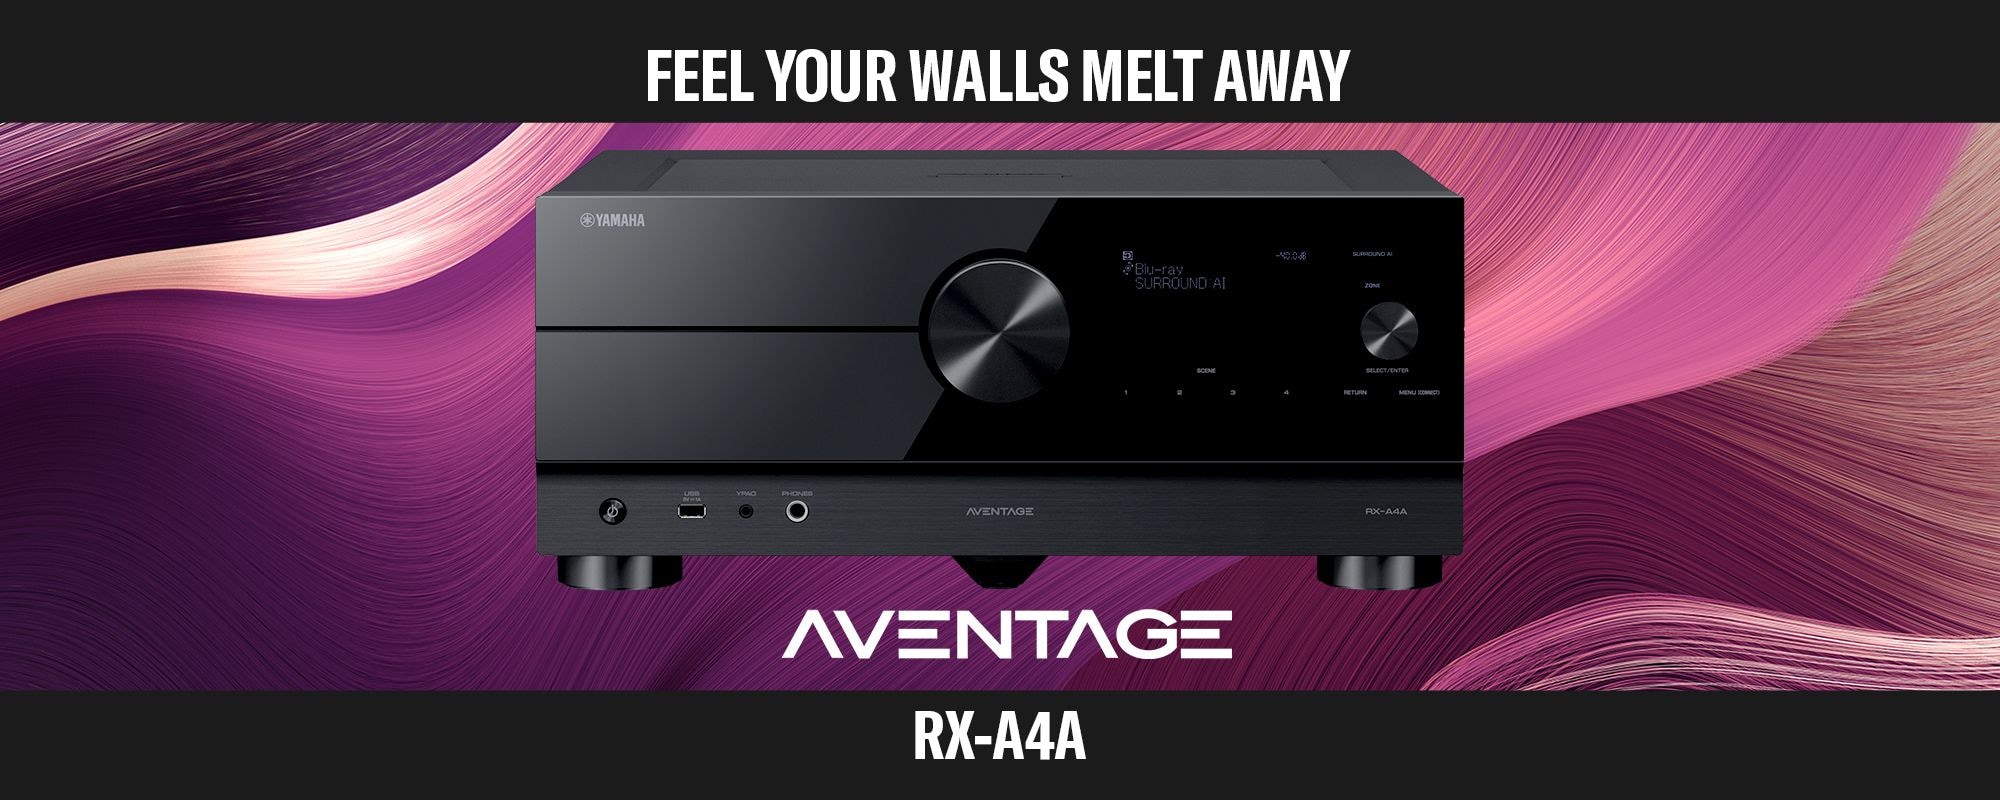 Feel Your Walls Melt Away - Yamaha AVENTAGE RX-A4A 7.2-Channel AV Receiver with 8K HDMI and MusicCast Header - Desktop